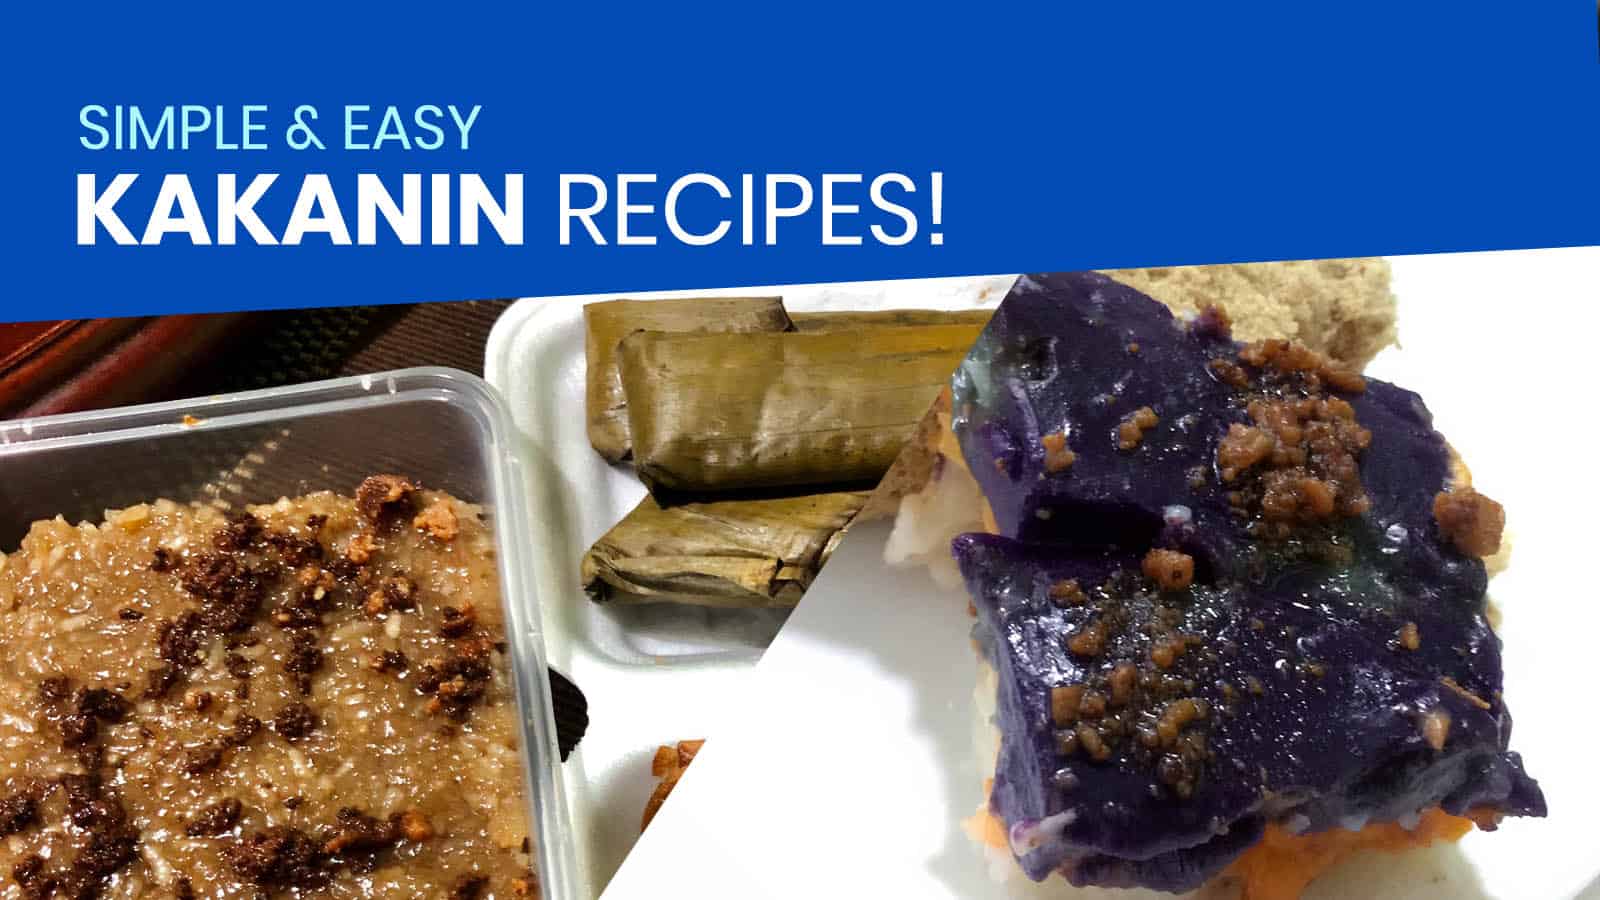 10 Easy Kakanin Recipes To Try At Home The Poor Traveler Itinerary Blog